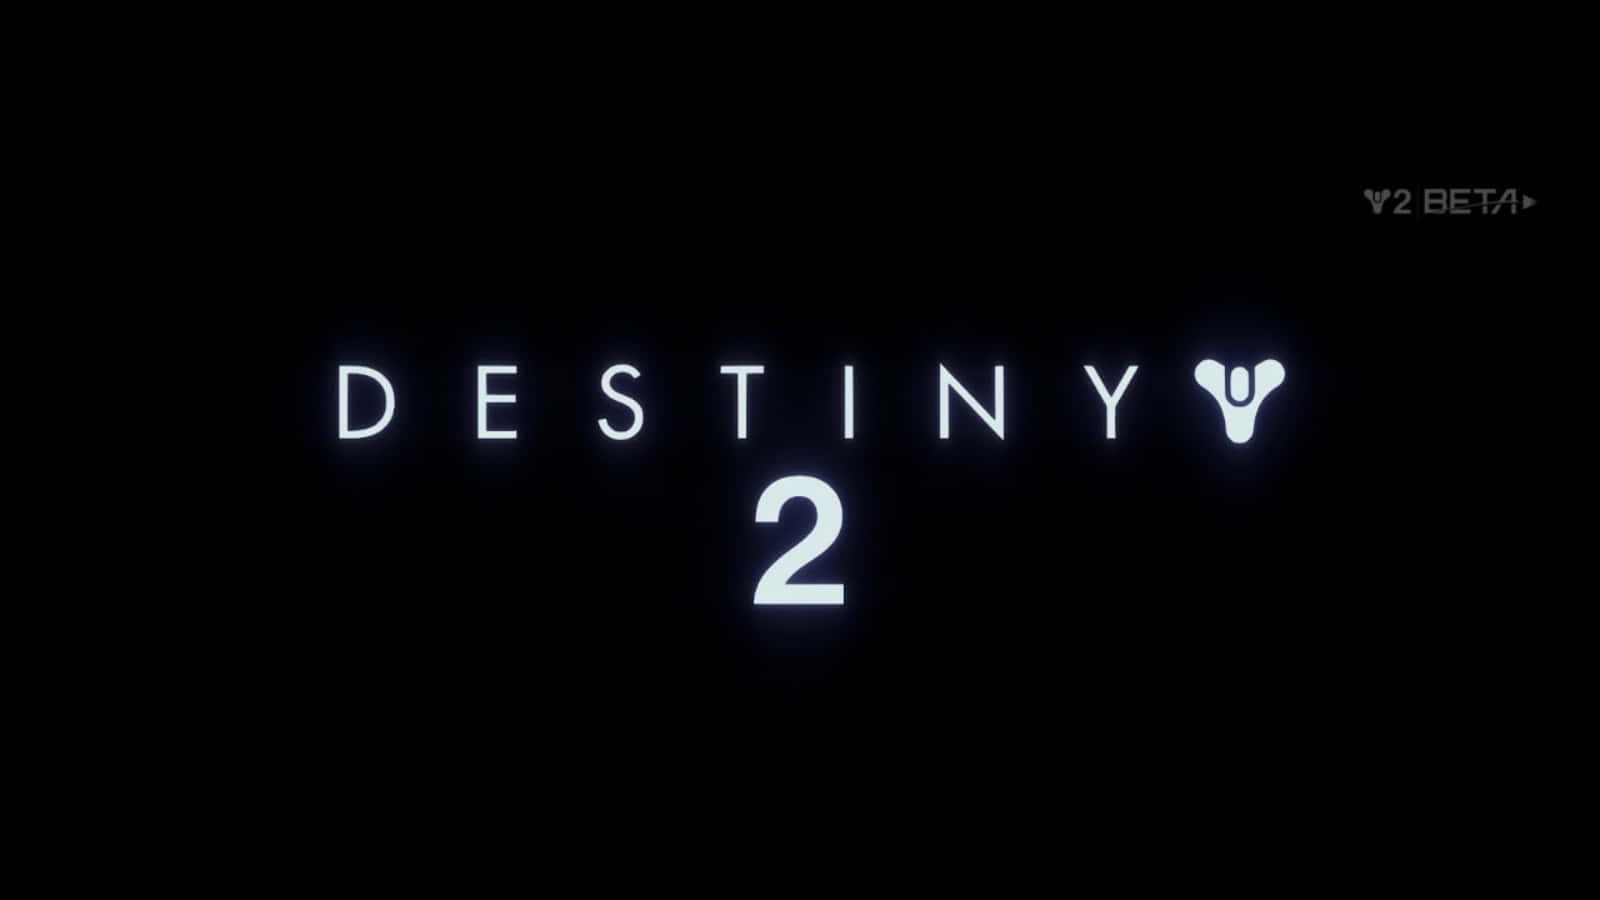 The official logo of the highly anticipated video game, Destiny 2 Wallpaper